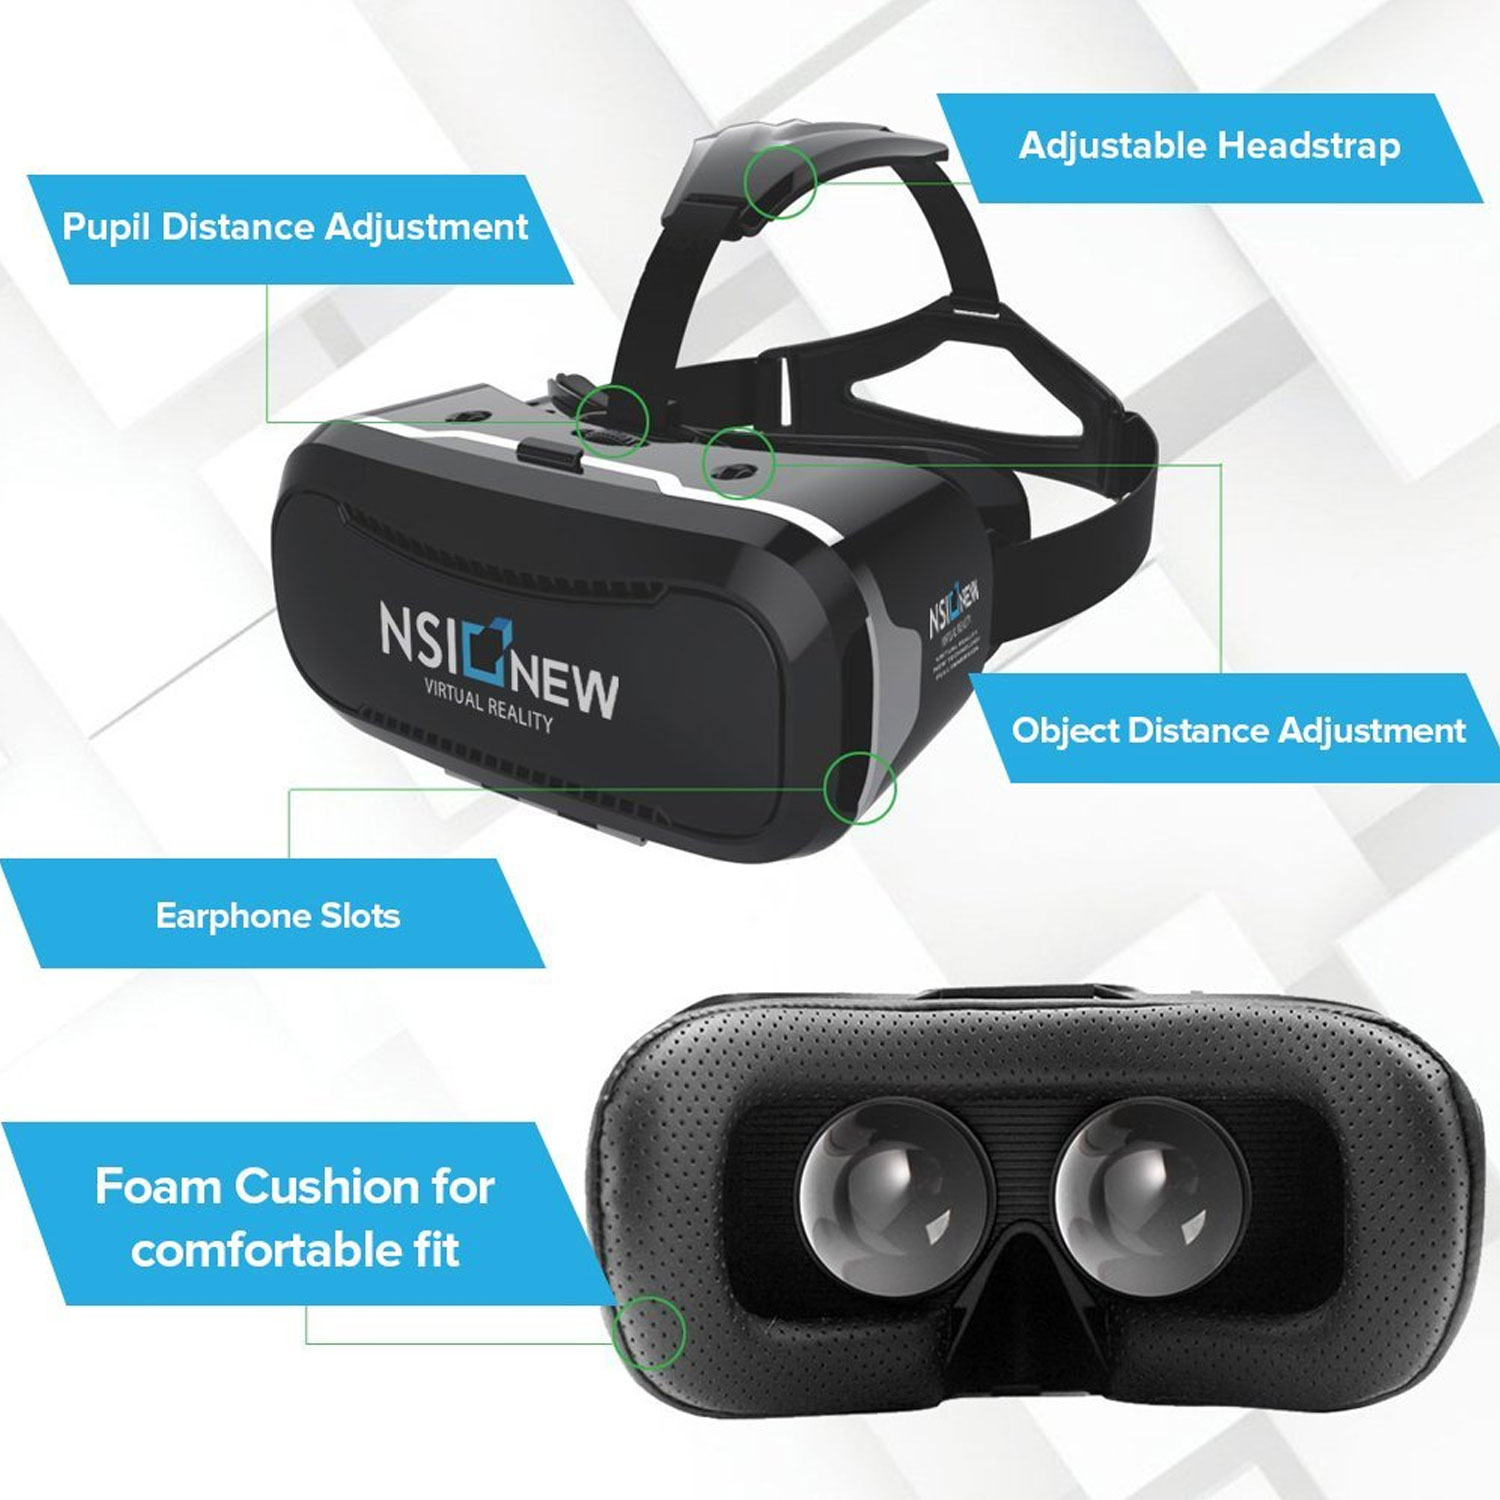 3D Virtual Reality Headset HD Gaming, Movies & 360˚ Video Experience with Bluetoothip Around Ladies